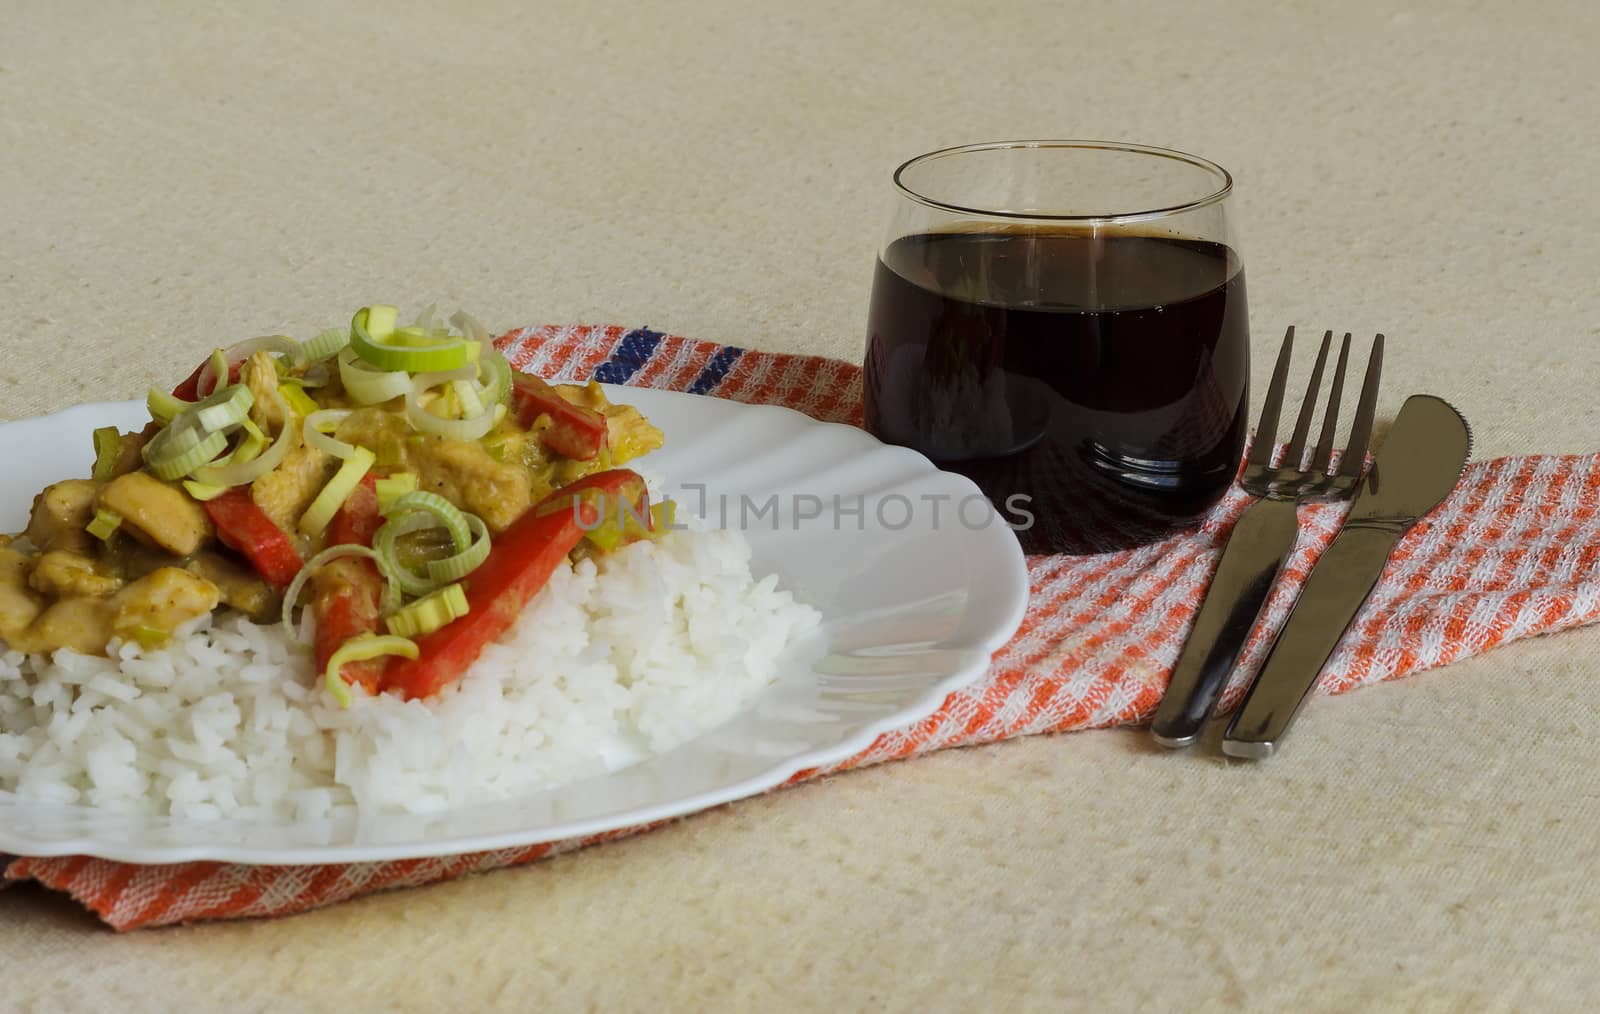 Vietnamese food - roast chicken meat with vegetables and rice on a white plate